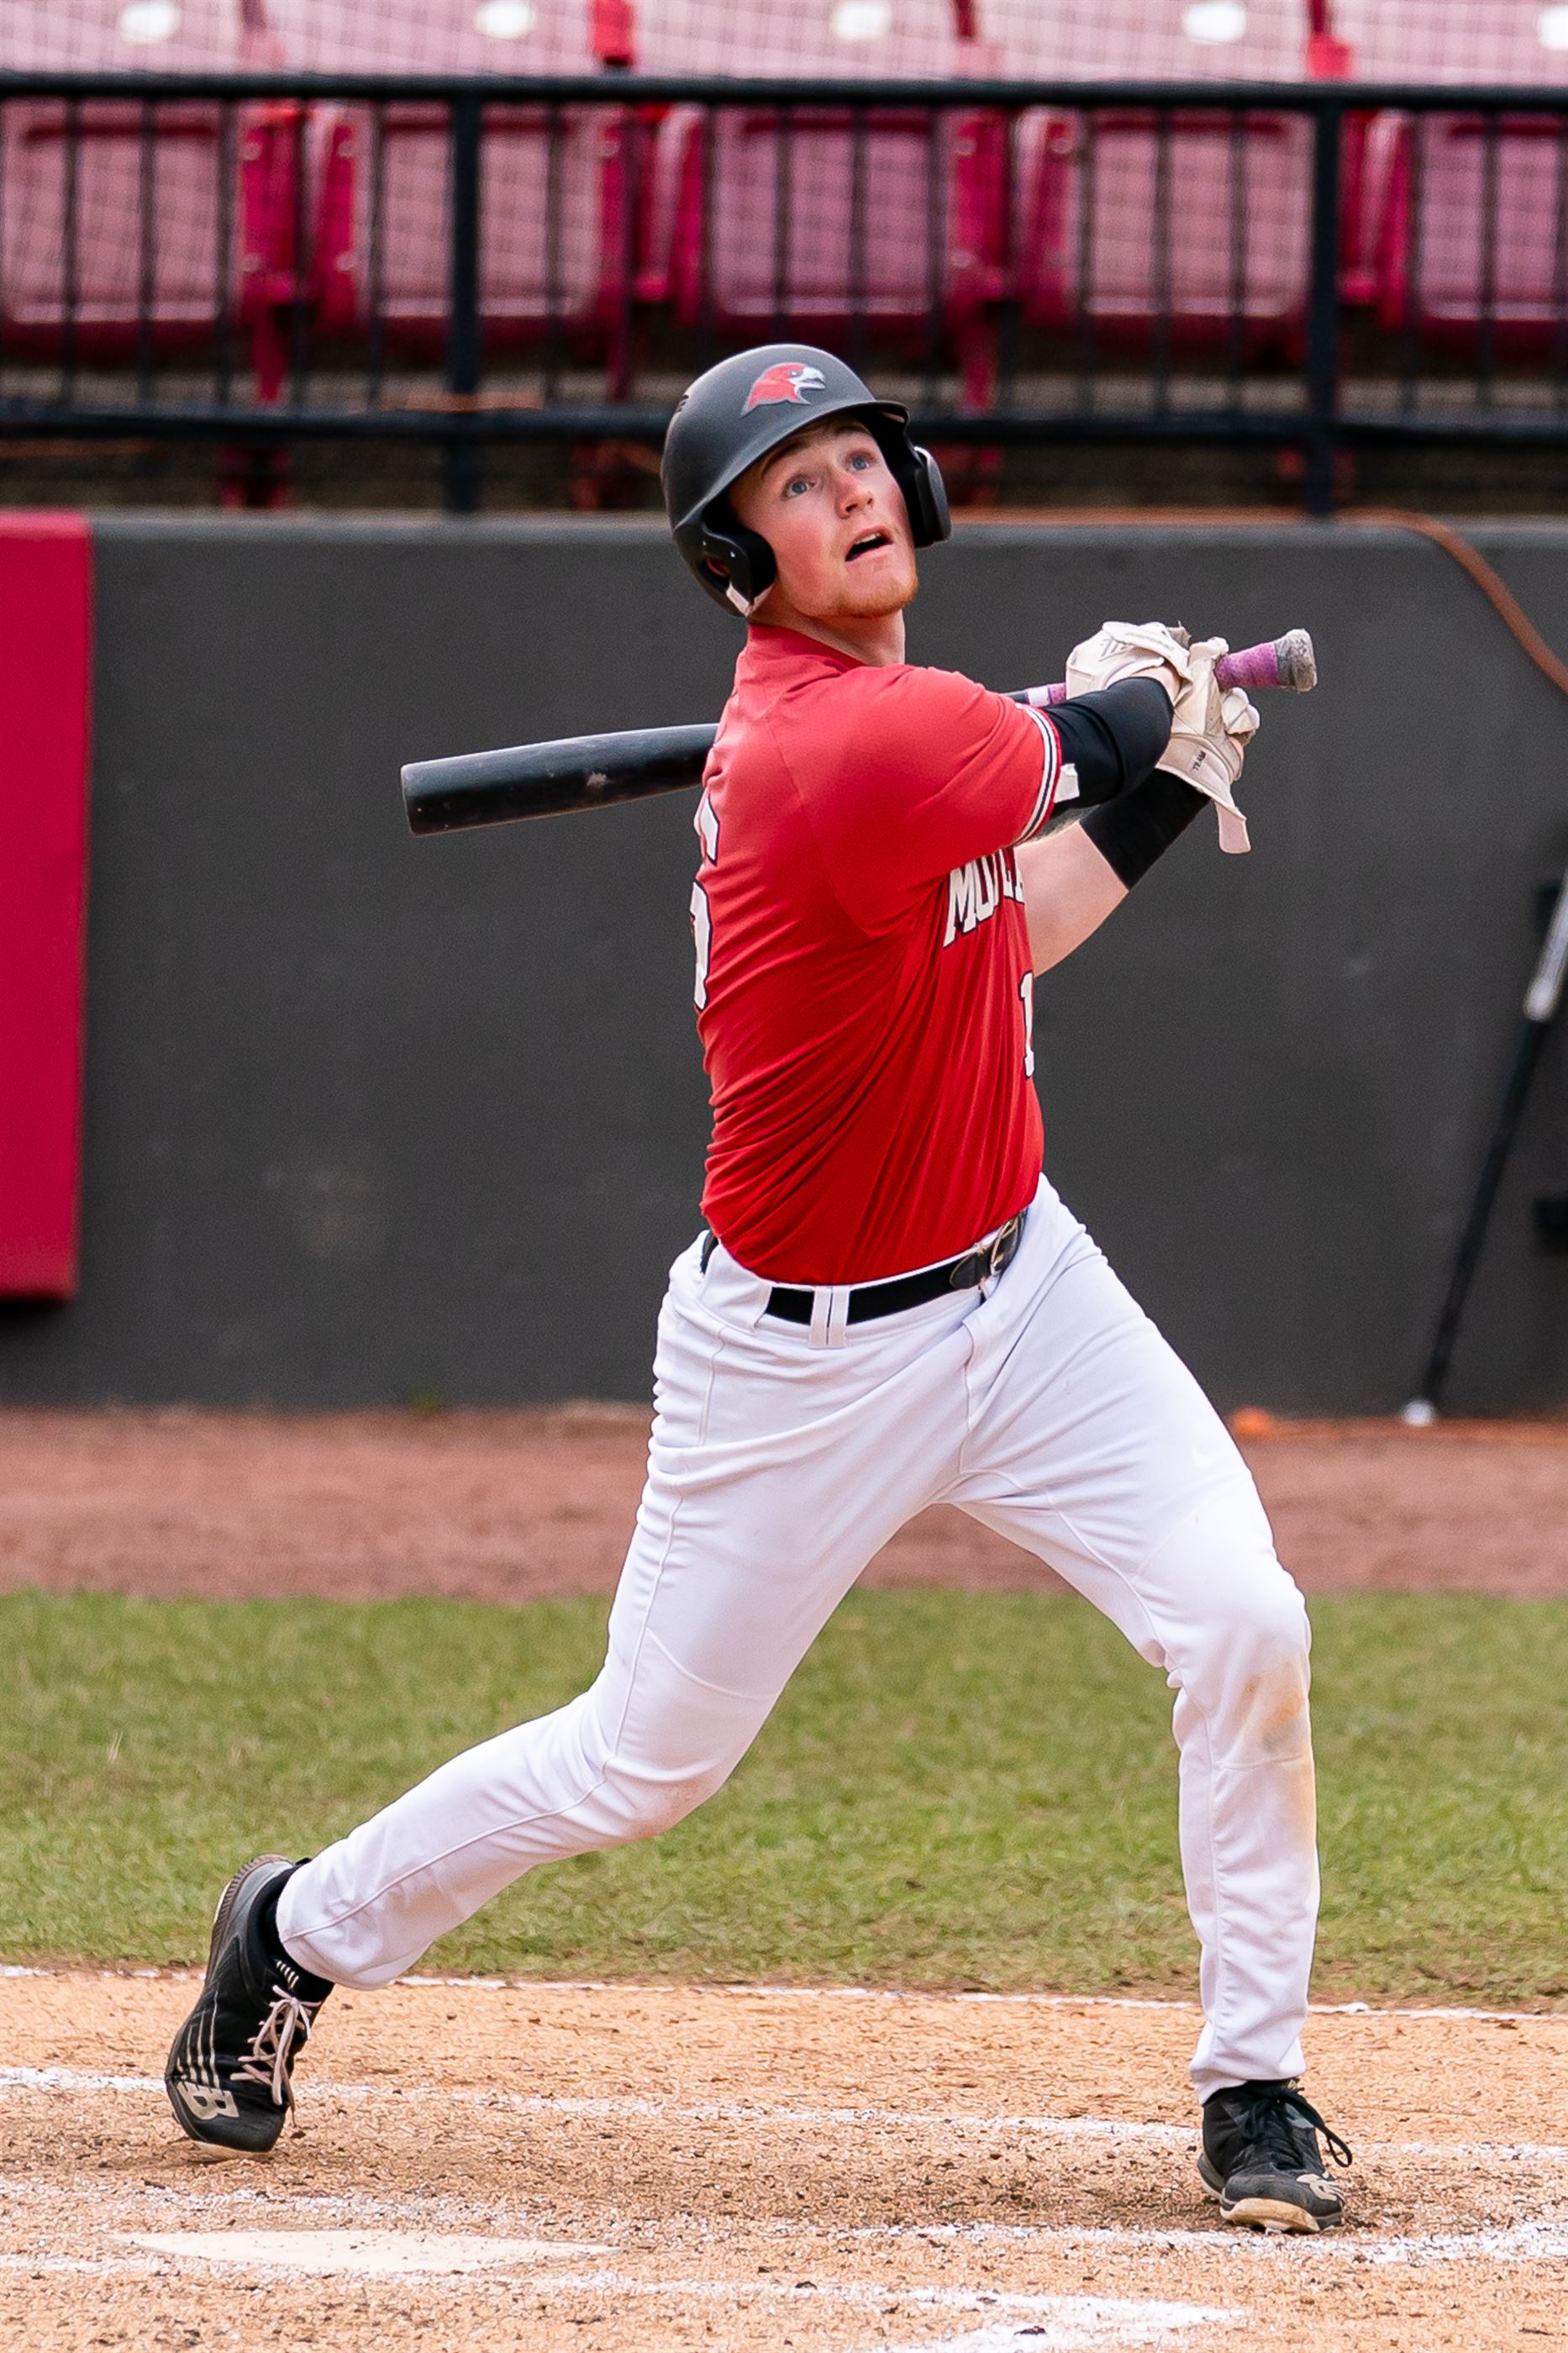 A Montclair State baseball player looks at the ball after swinging. Chris Krusberg | The Montclarion